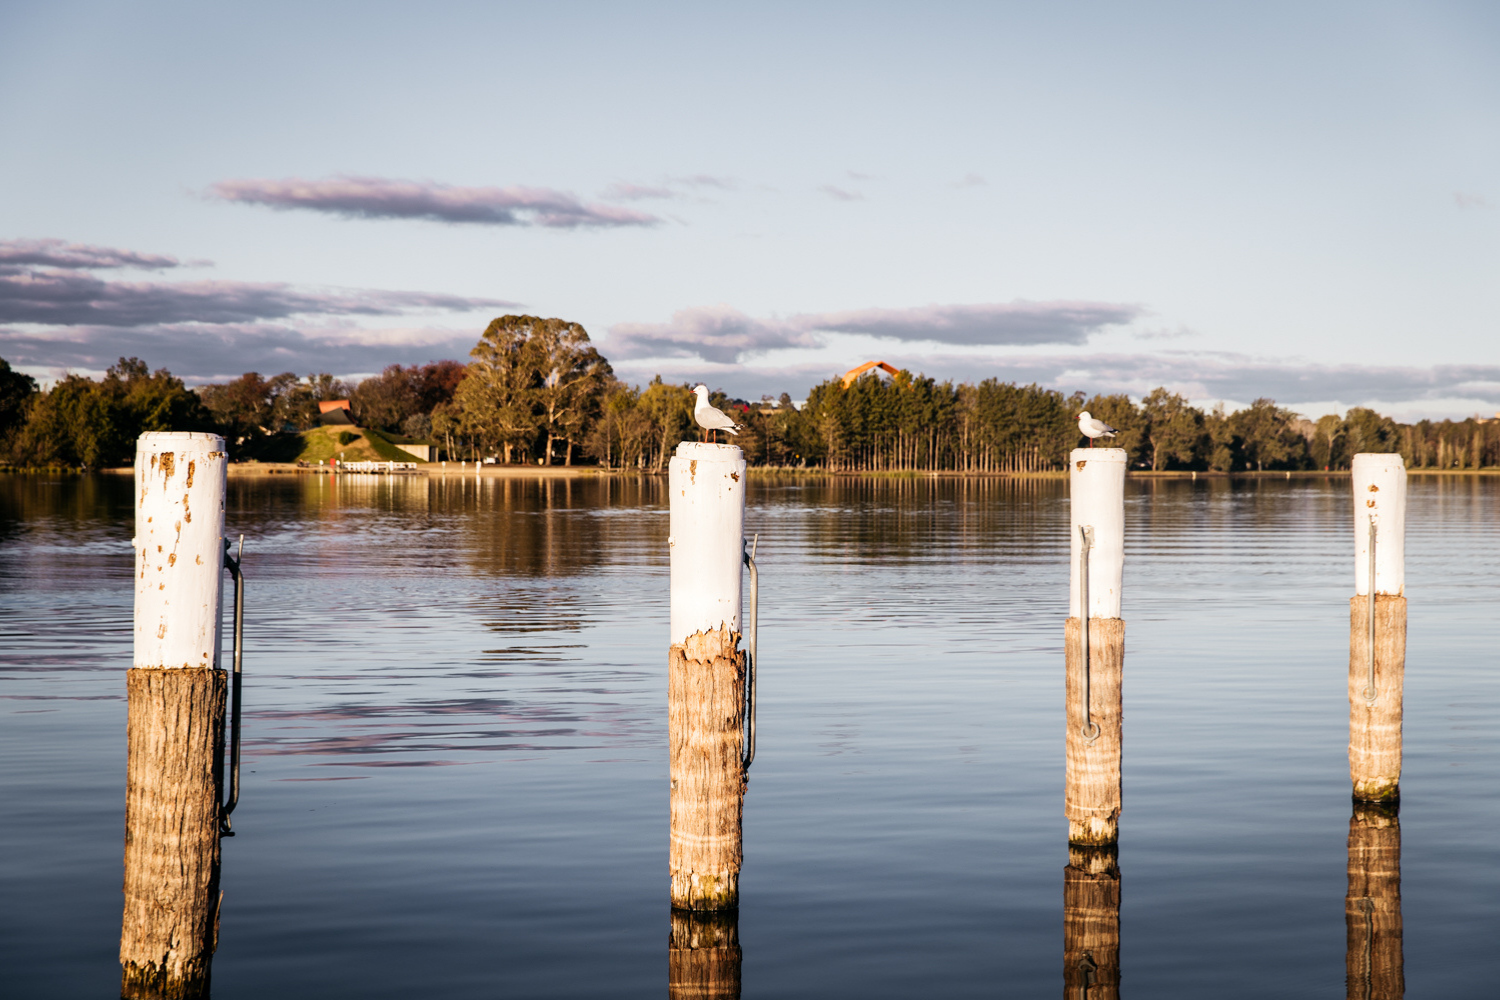 Four old pier pylons in deep water with a couple of seagulls sitting on top